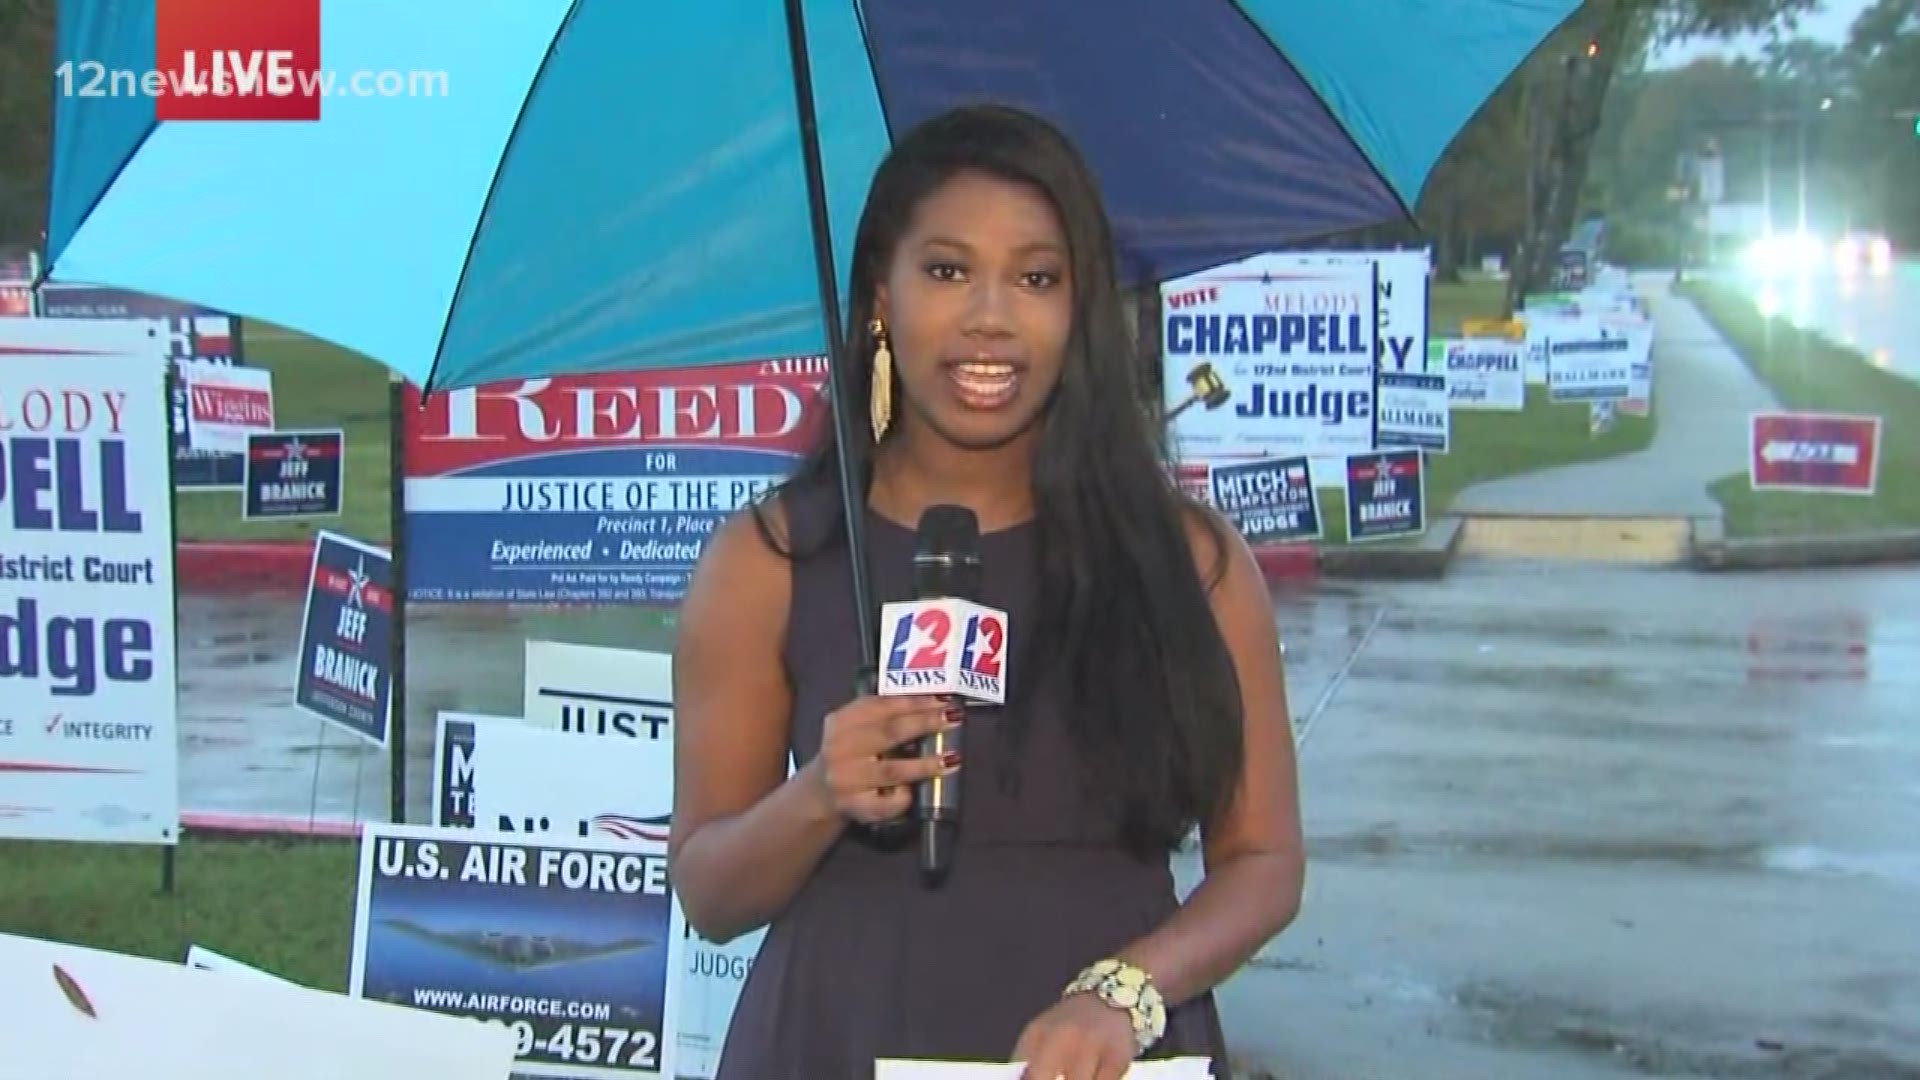 12 News reporter Rachel Keller is live at the polls on Election Day with everything you need to know before going out to vote